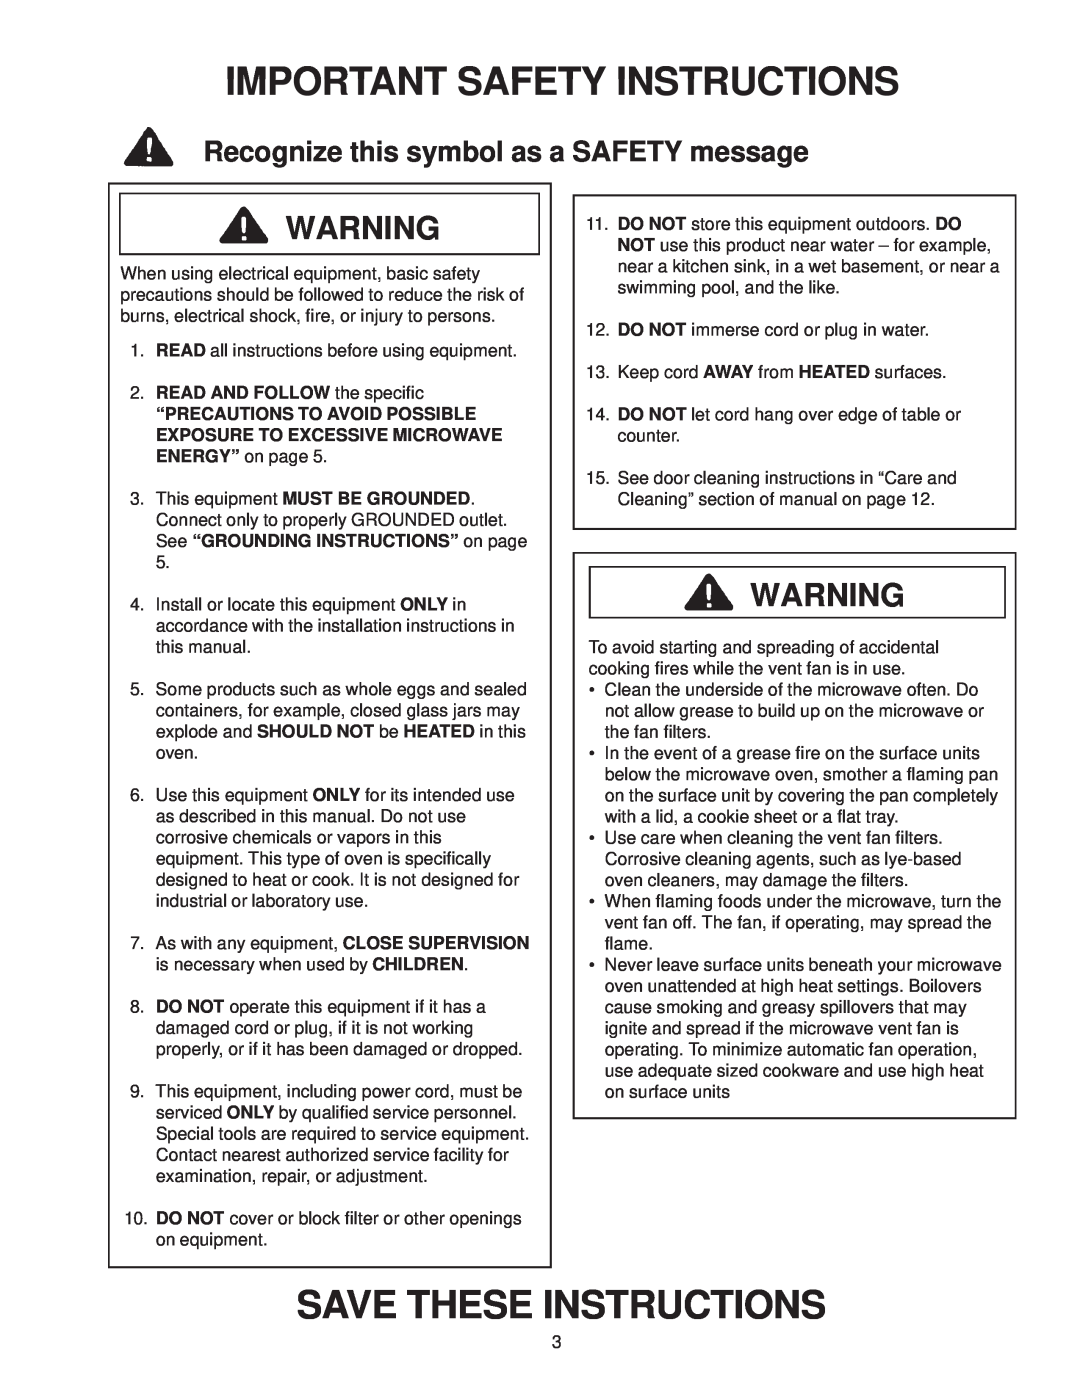 Amana MVH230 owner manual Important Safety Instructions, Save These Instructions, Recognize this symbol as a SAFETY message 